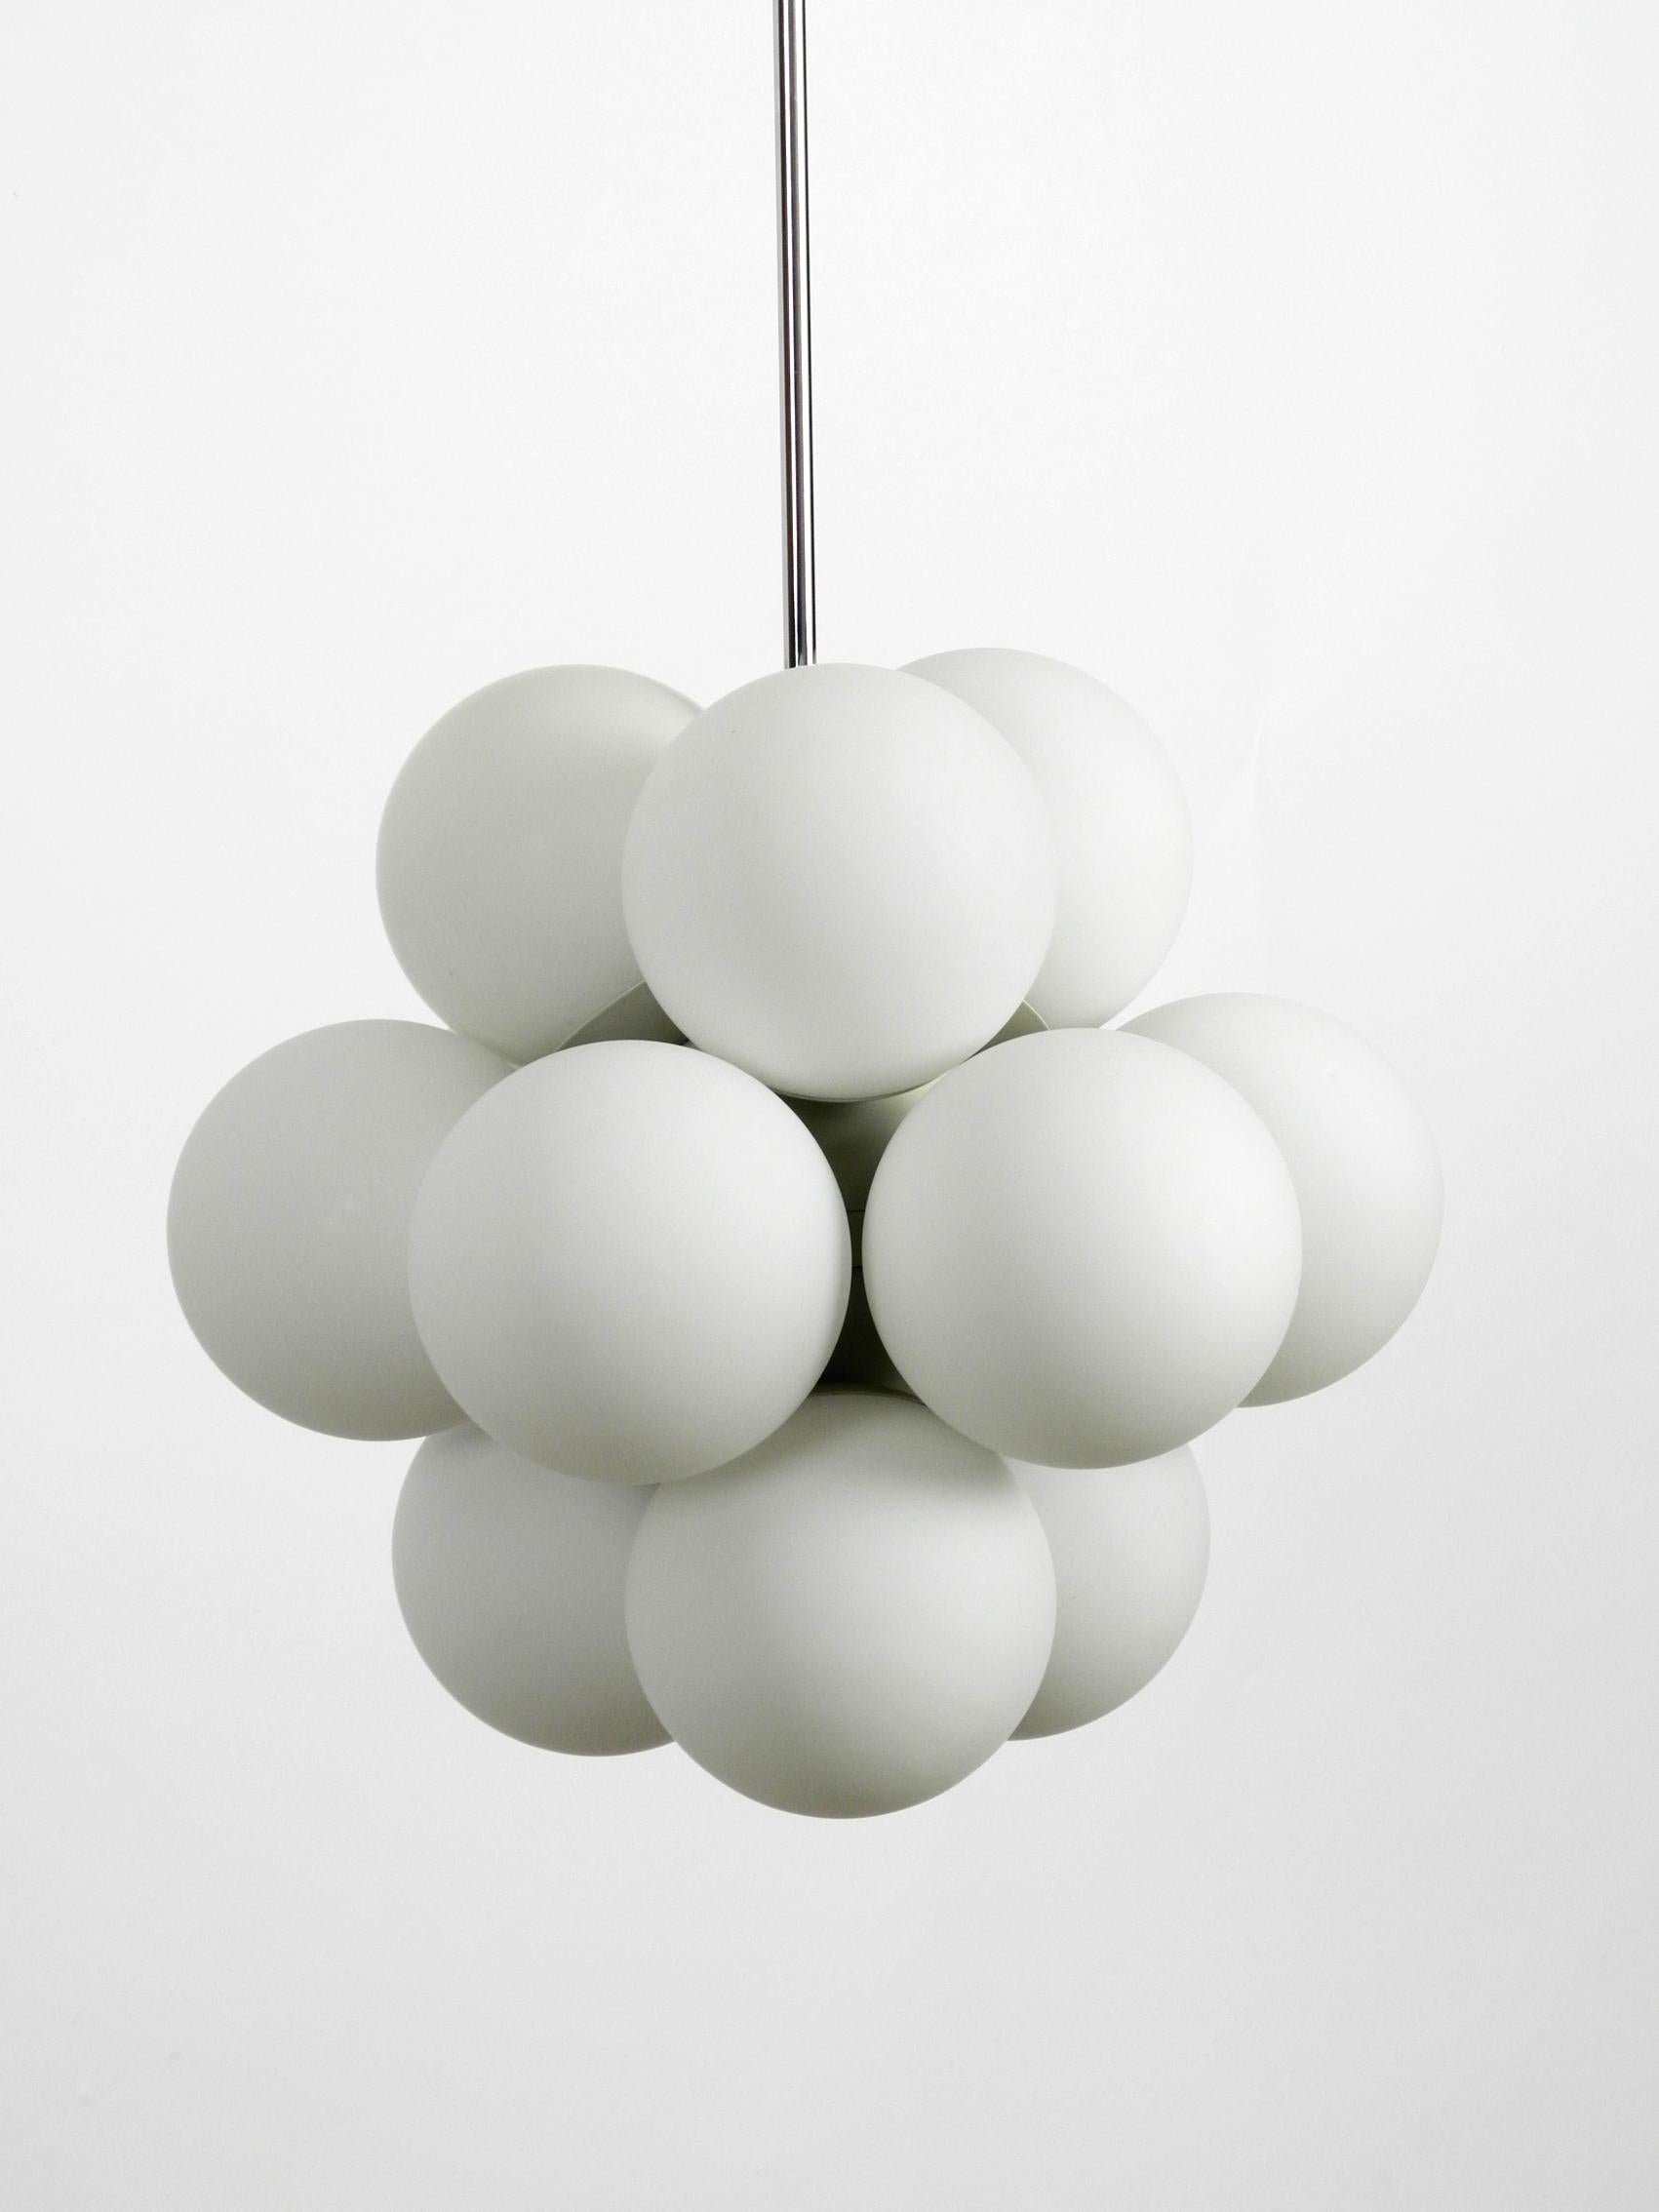 Unused 60s Atomic Space Age Kaiser Leuchten metal ceiling lamp 12 glass spheres In Good Condition For Sale In München, DE